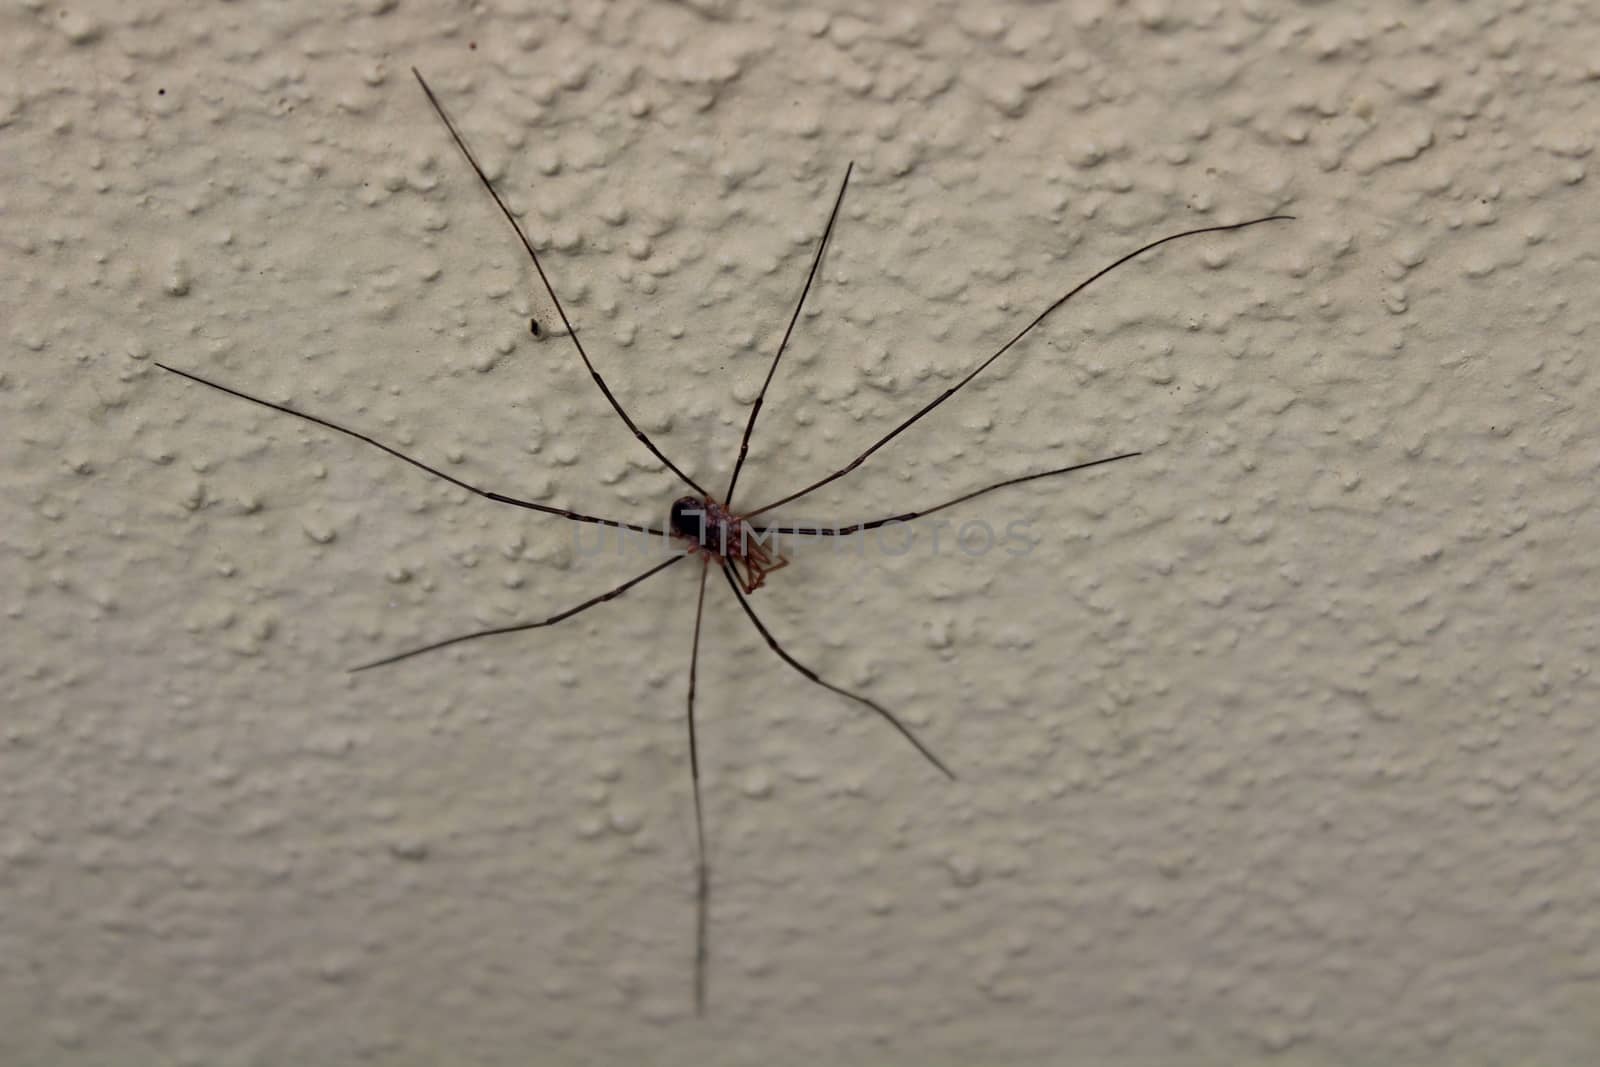 The picture shows a harvestman on a white wall